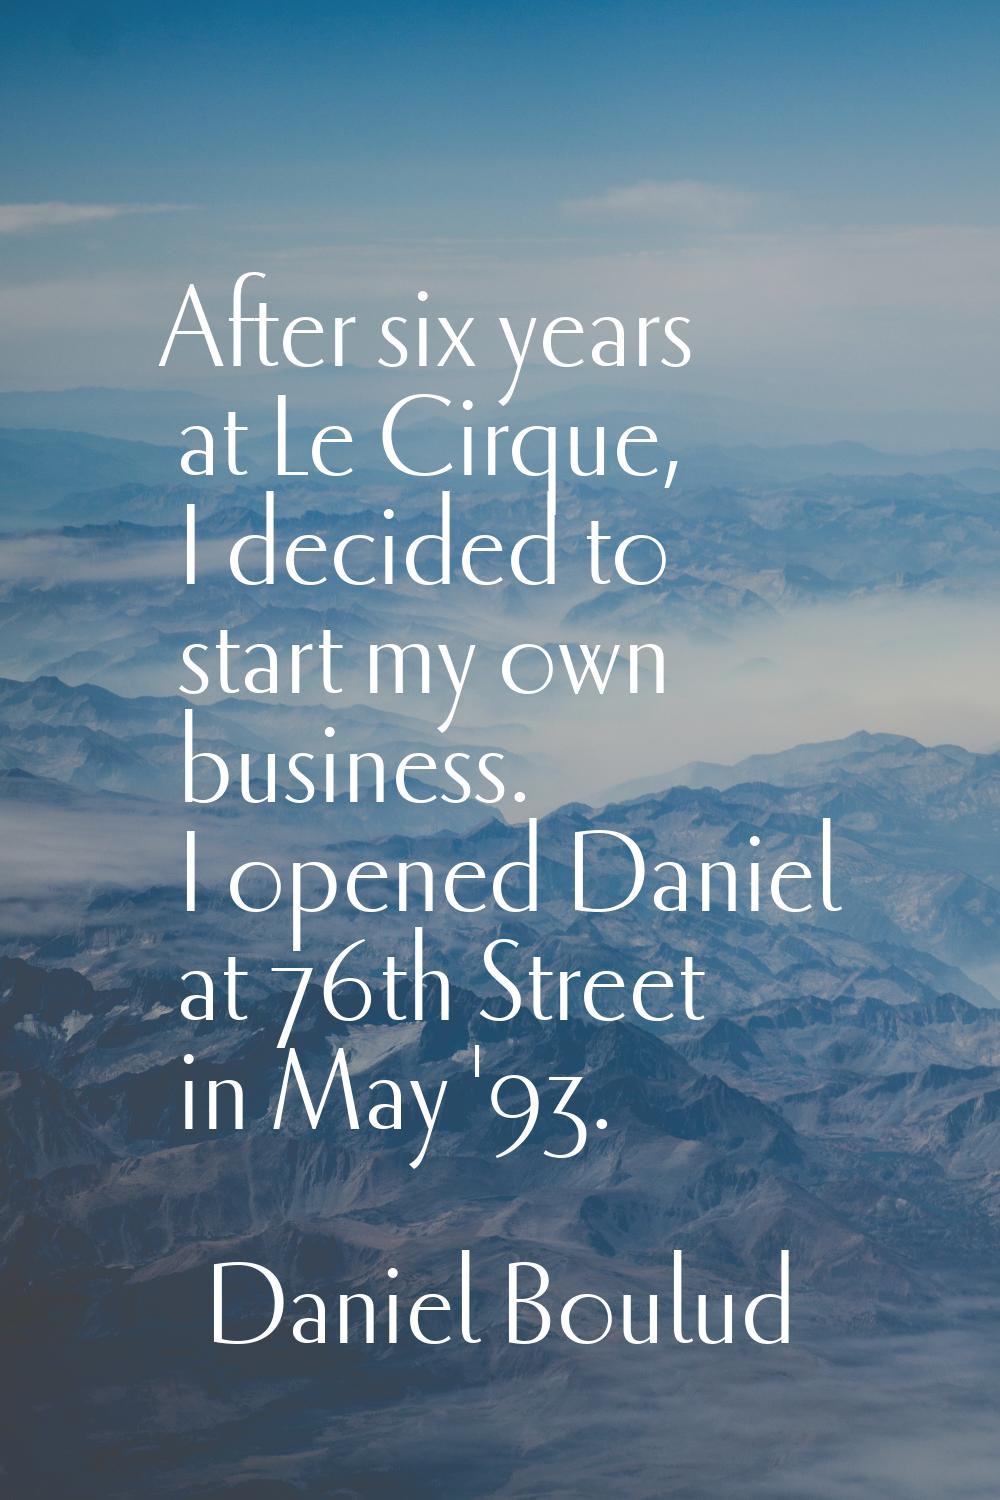 After six years at Le Cirque, I decided to start my own business. I opened Daniel at 76th Street in